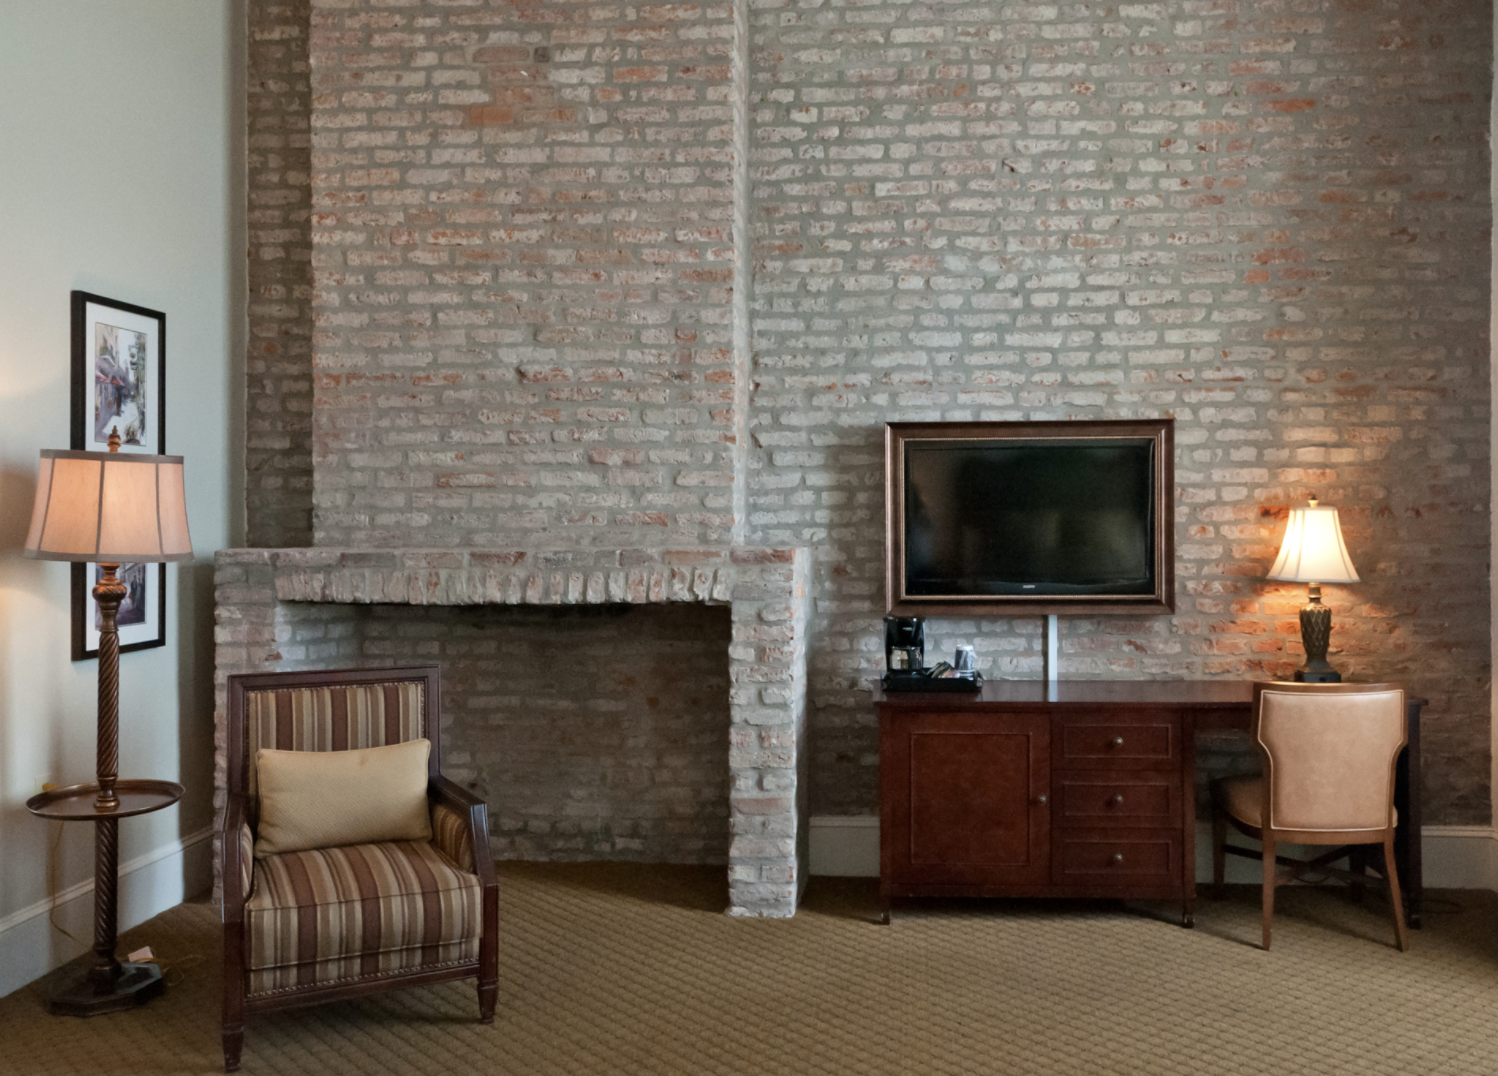 Room with exposed brick walls and victorian furnishing accents